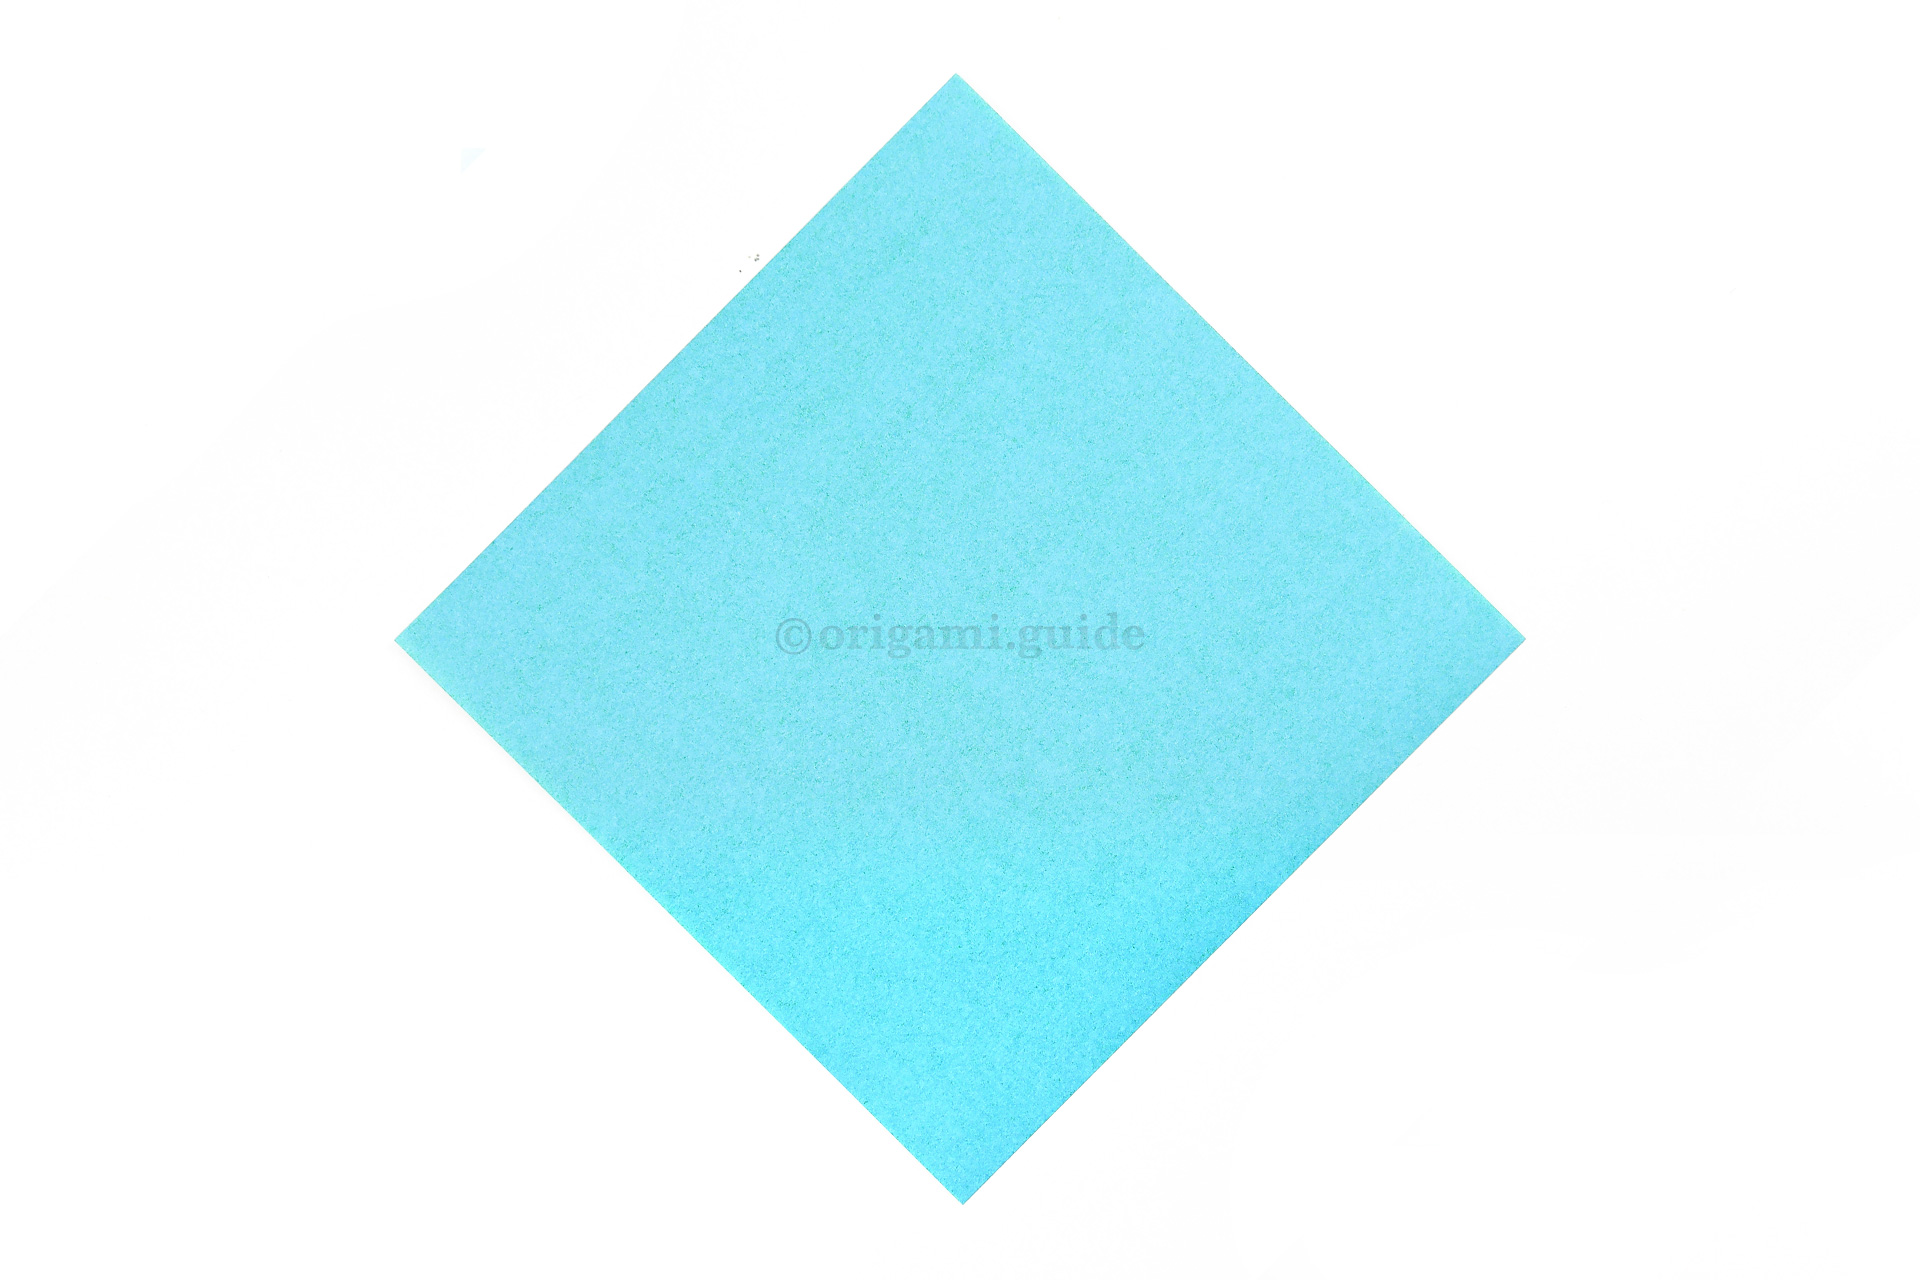 This is the front of our origami paper, our dog face will be this colour.